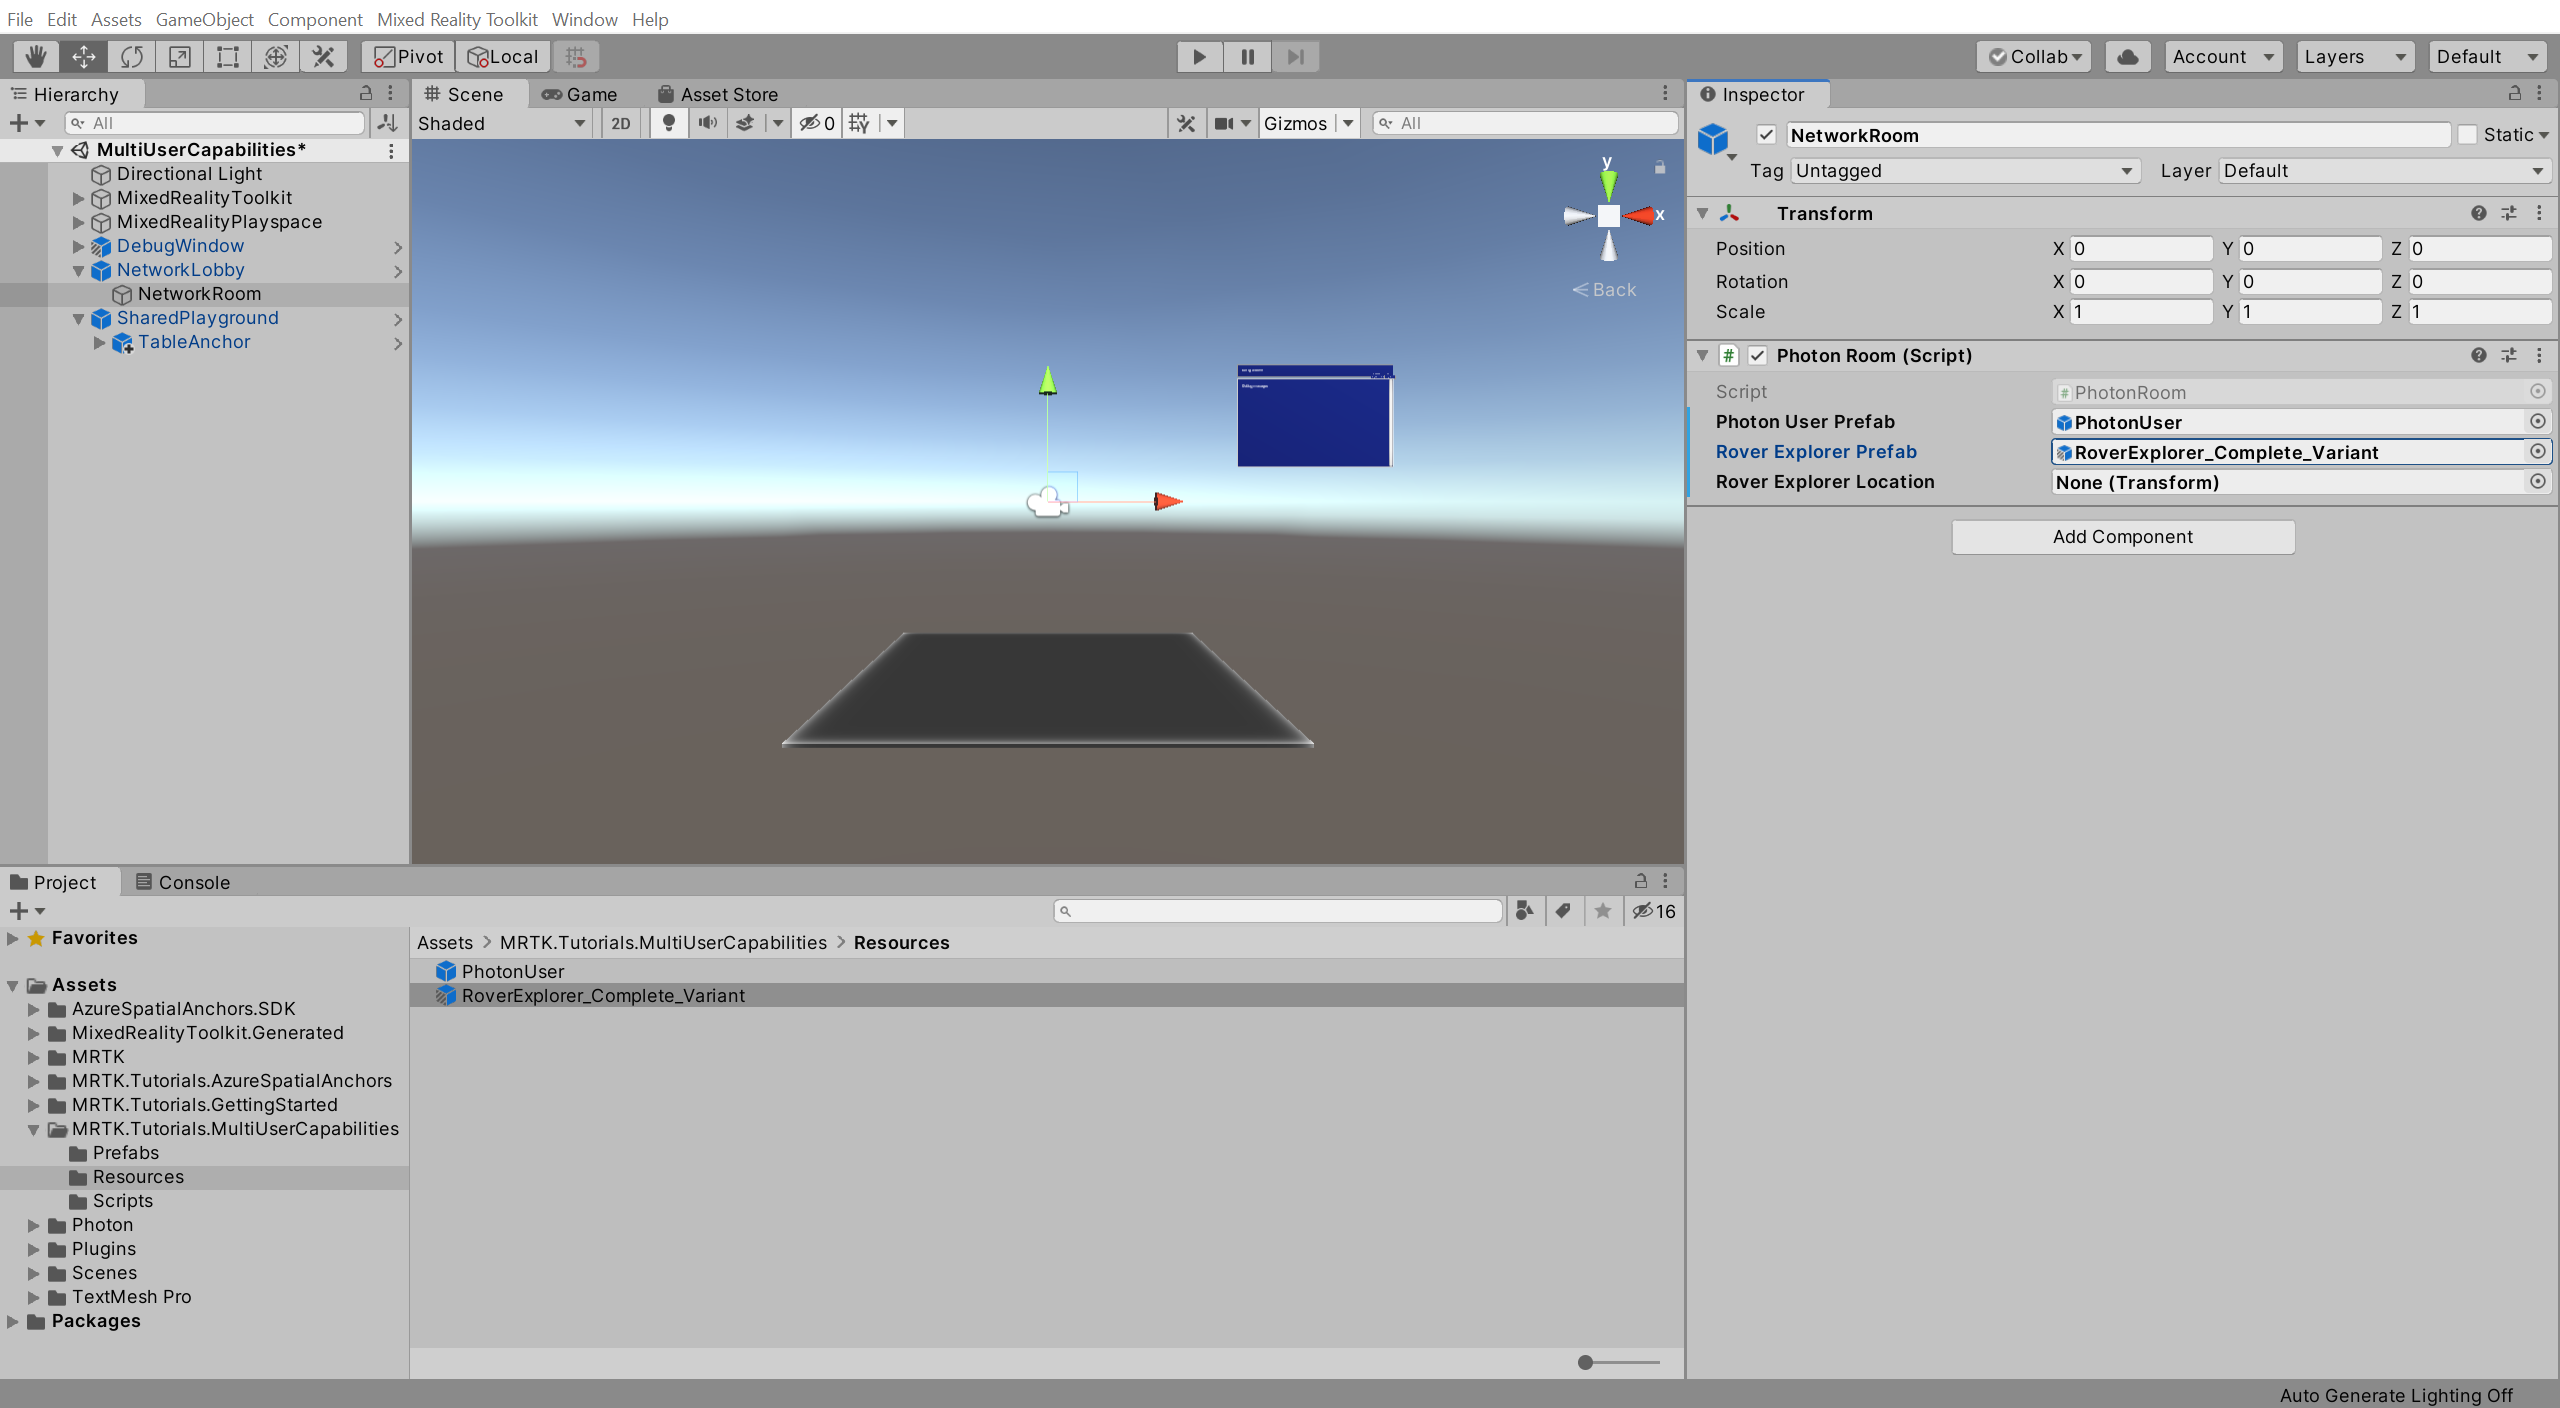 Unity with Photon Room component partially configured